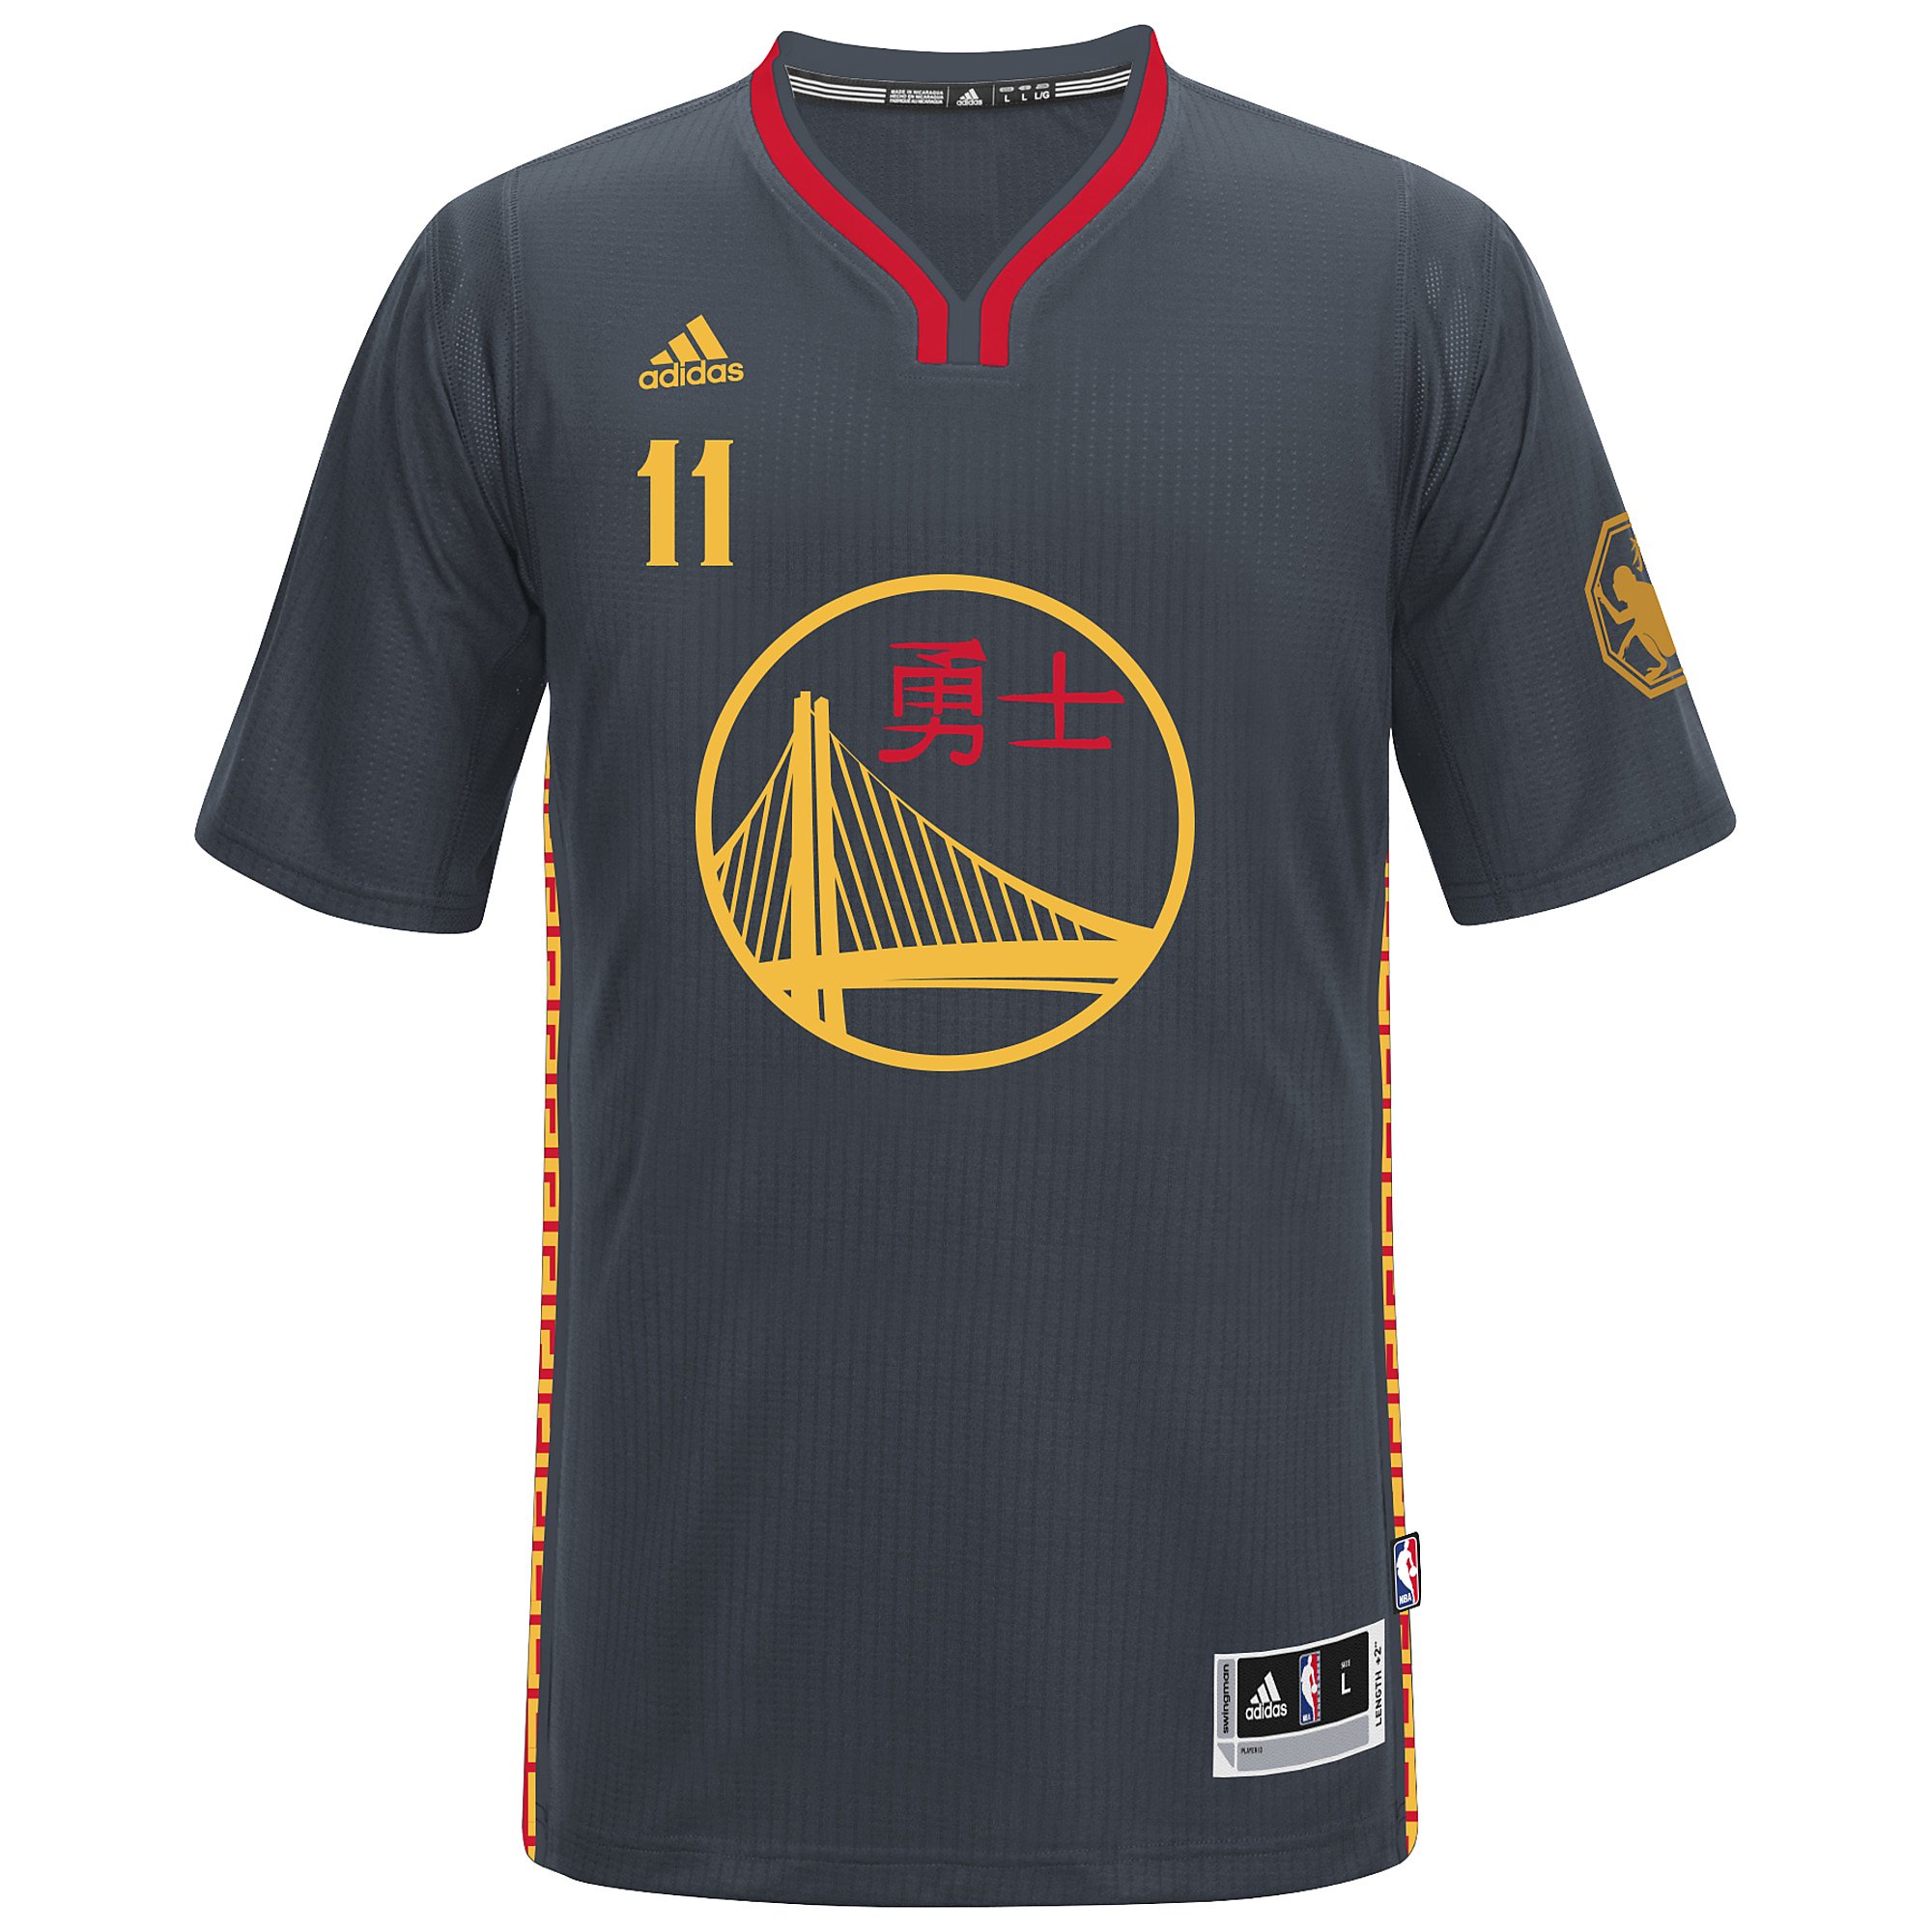 Golden State Warriors on X: #Warriors Chinese New Year gear is